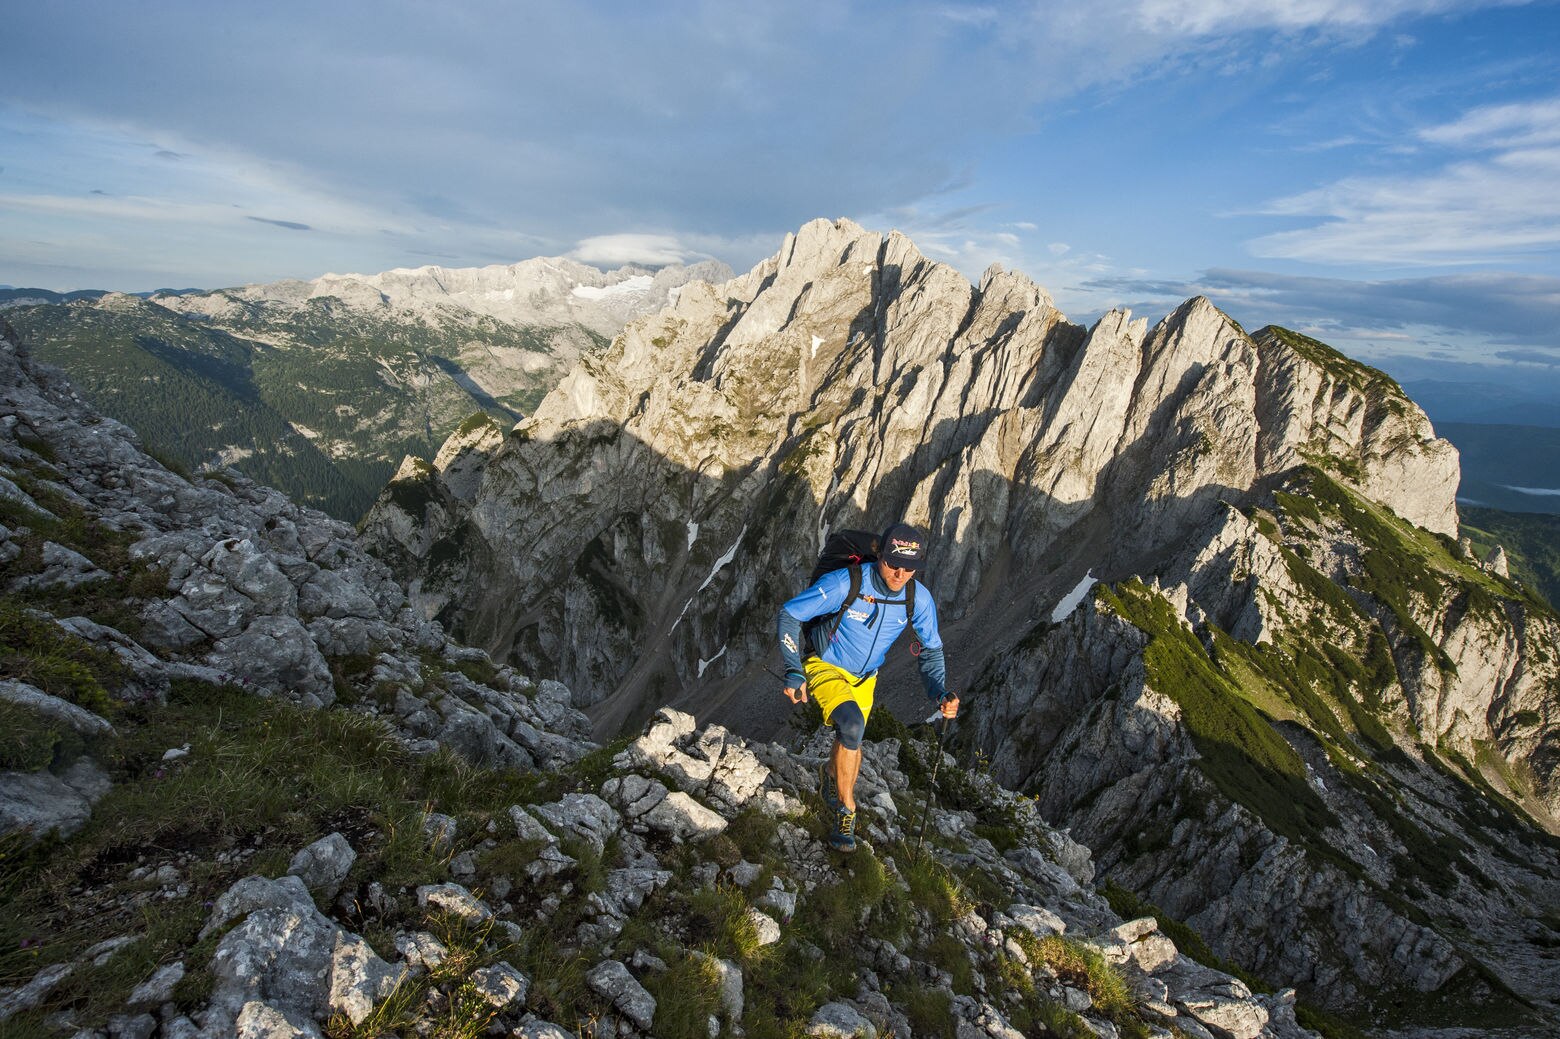 Participant hikes during the Red Bull X-Alps preparations in Gosau, Austria on June 27th 2017